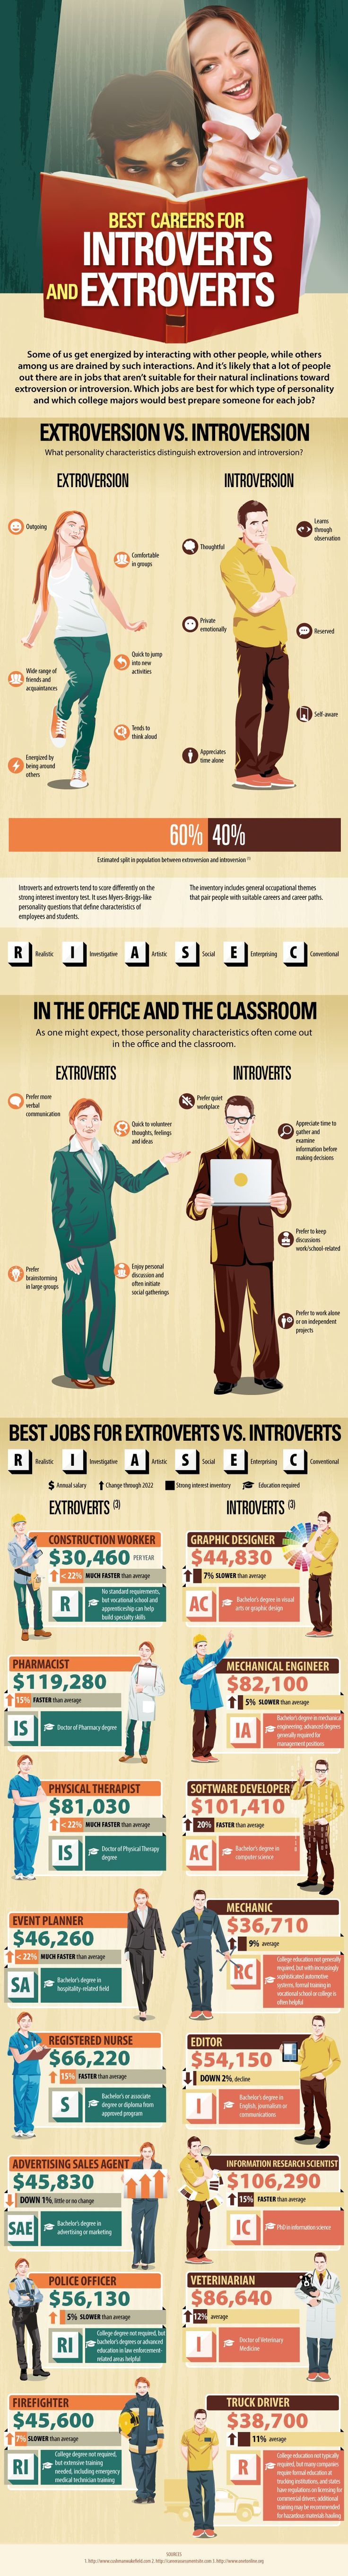 psychology-psychology-the-career-assessment-site-found-the-best-careers-for-introverts-ve